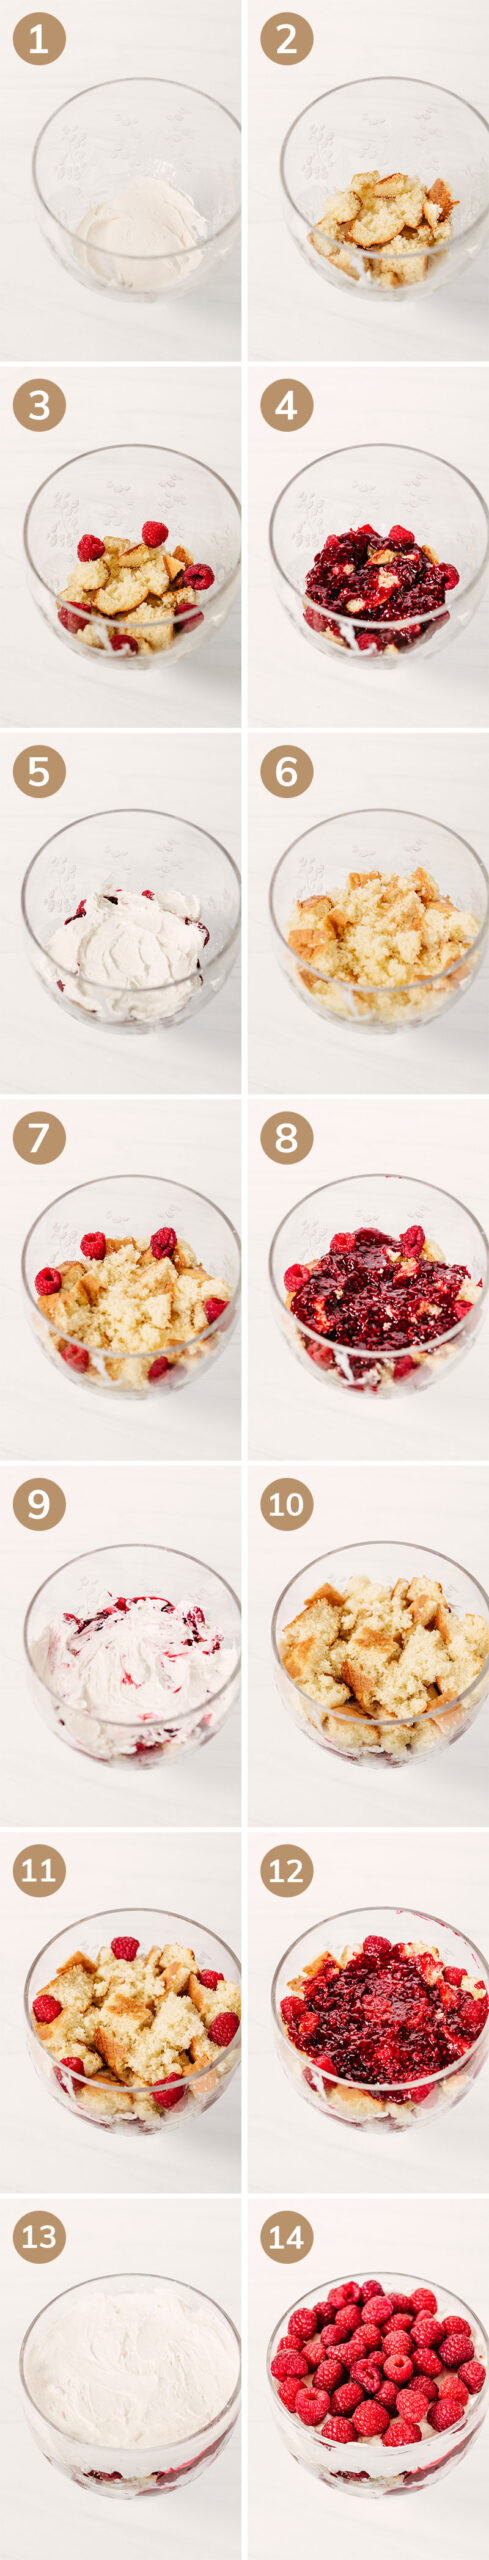 raspberry trifle step by step assembly